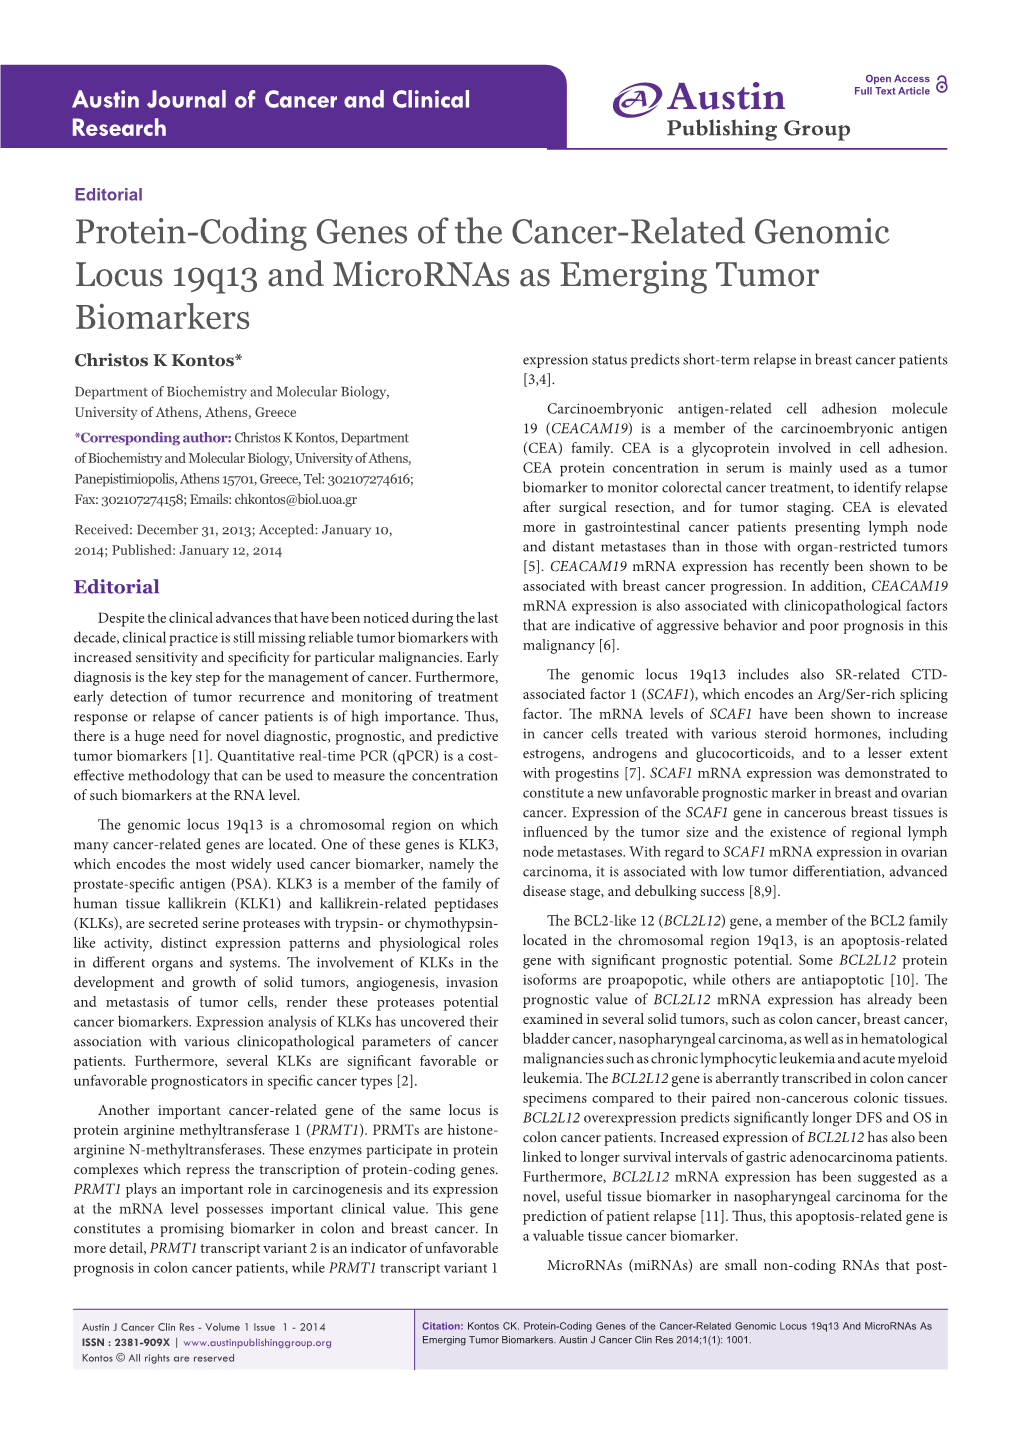 Protein-Coding Genes of the Cancer-Related Genomic Locus